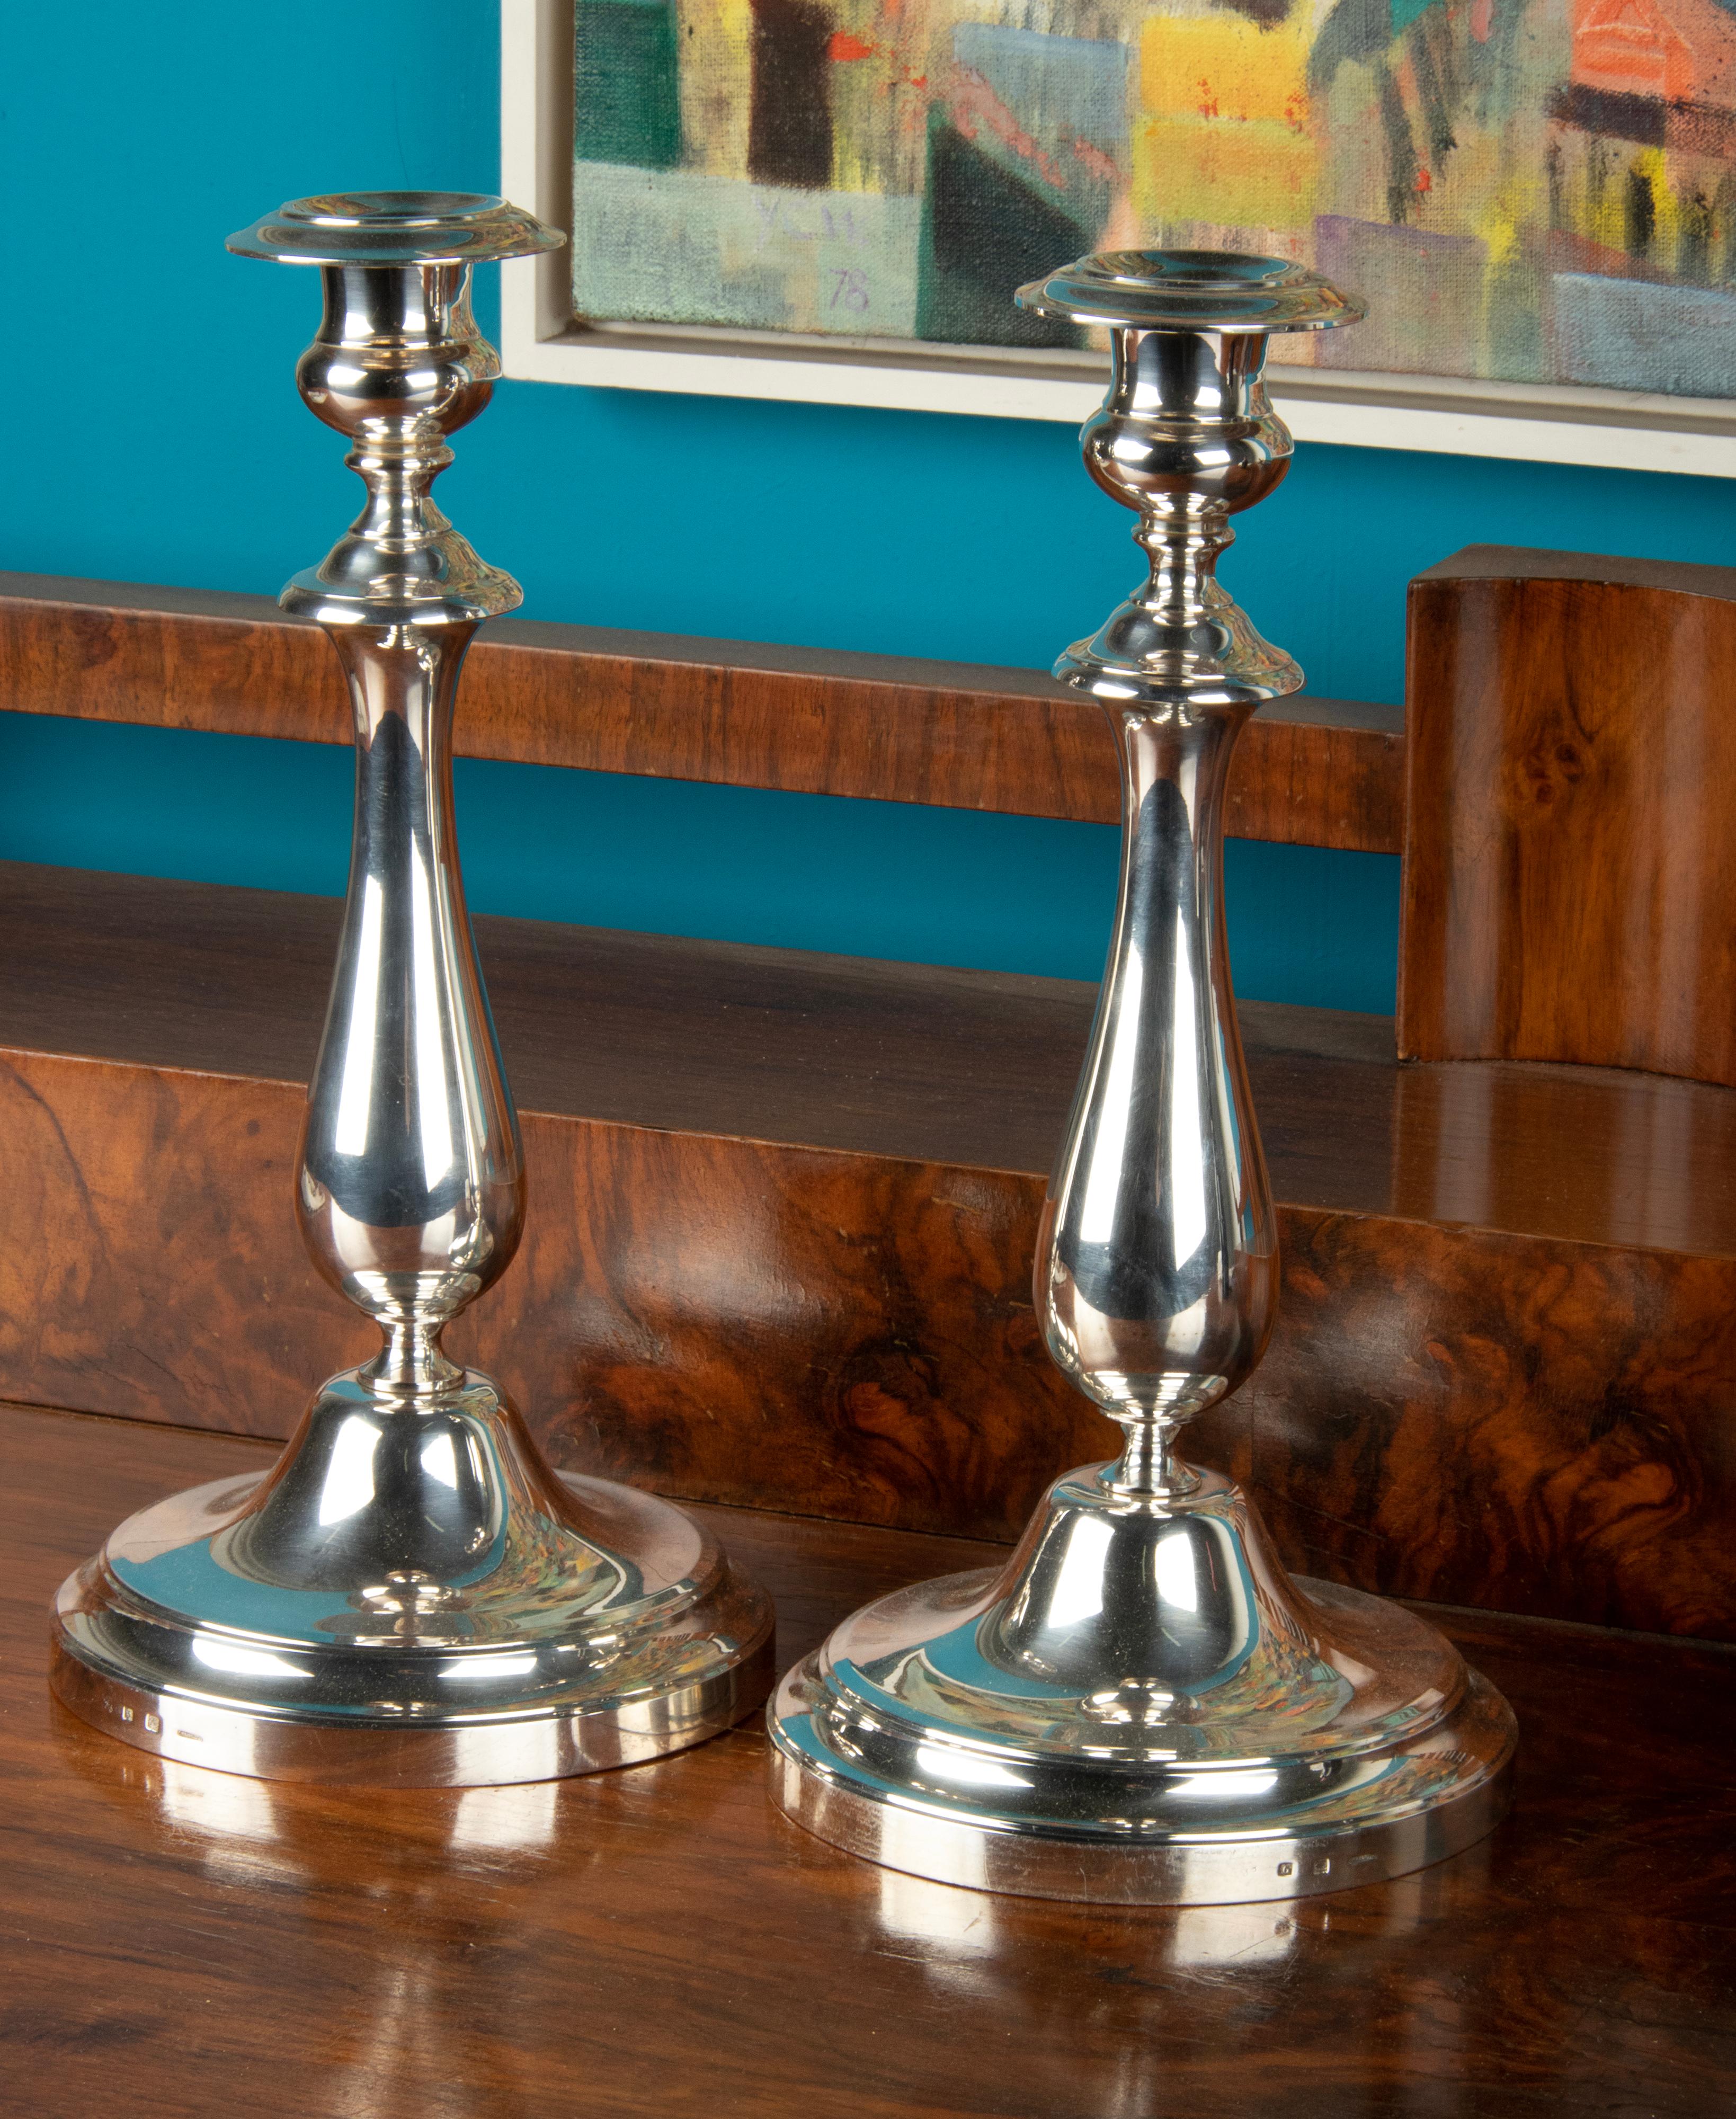 A Pair of Modern Classic Silver Plated Candlesticks made by Christofle France 2